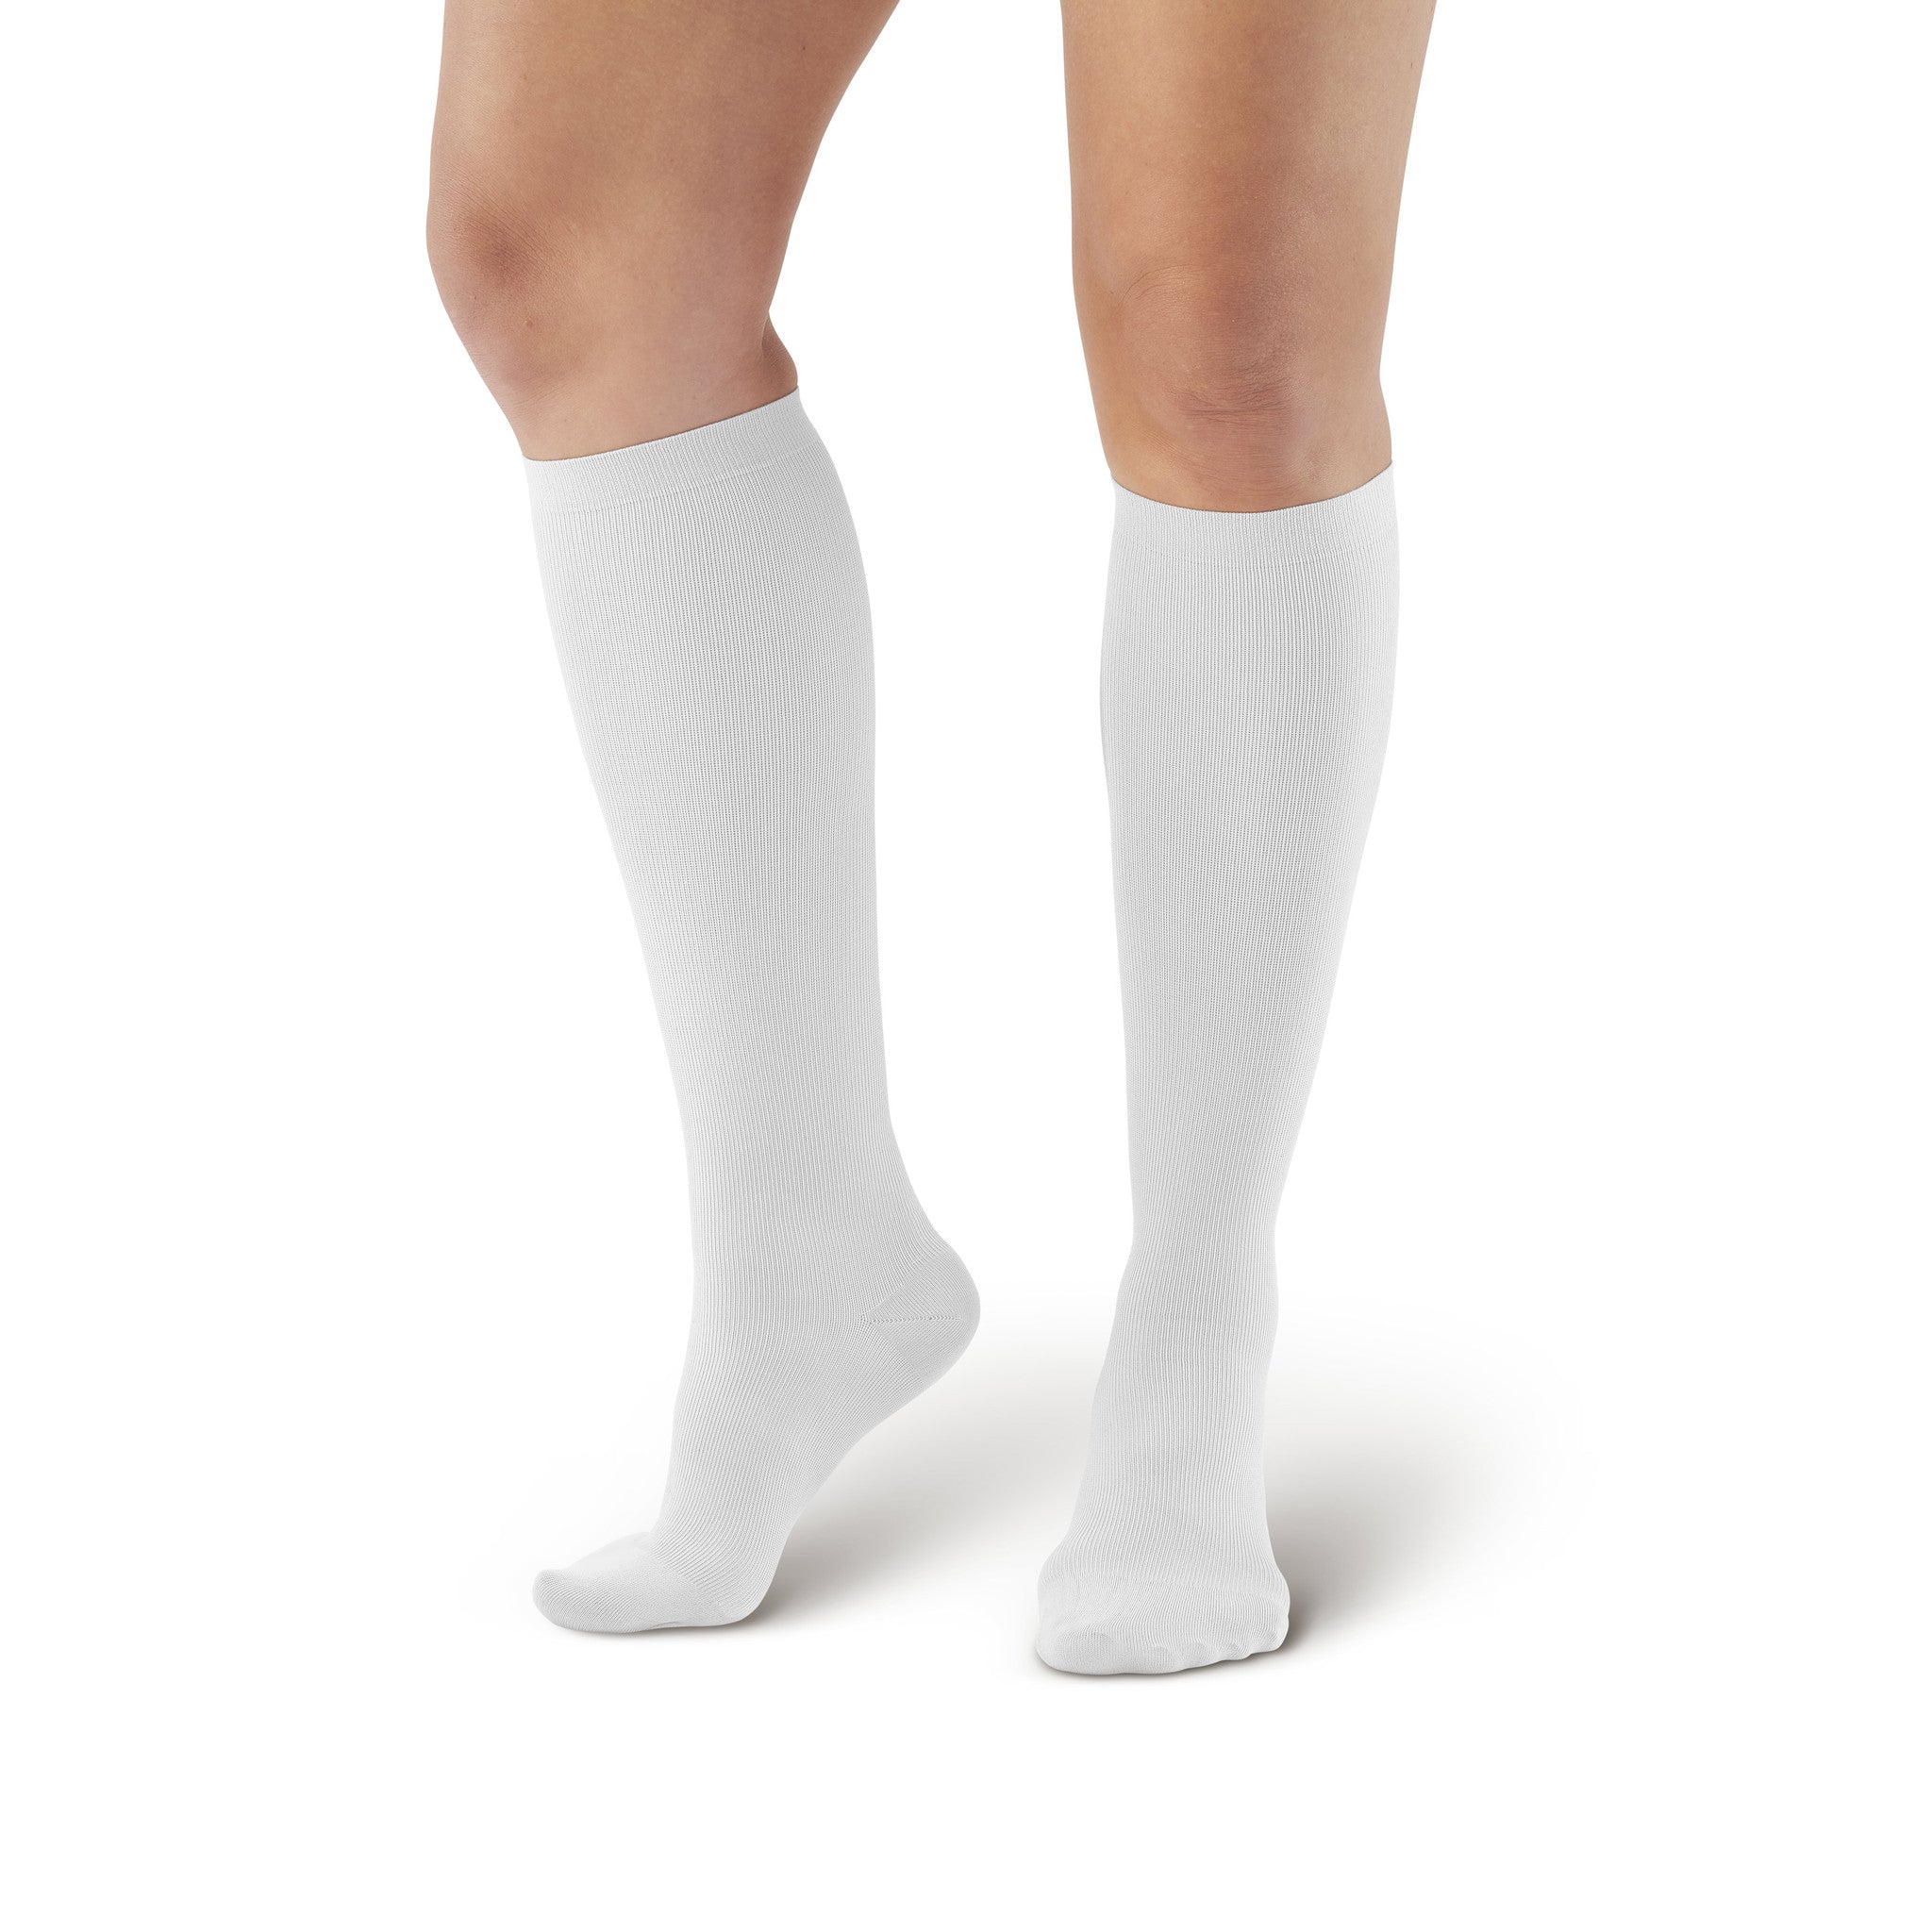 Ames Walker Compression Style Sock l Low Price Guarantee